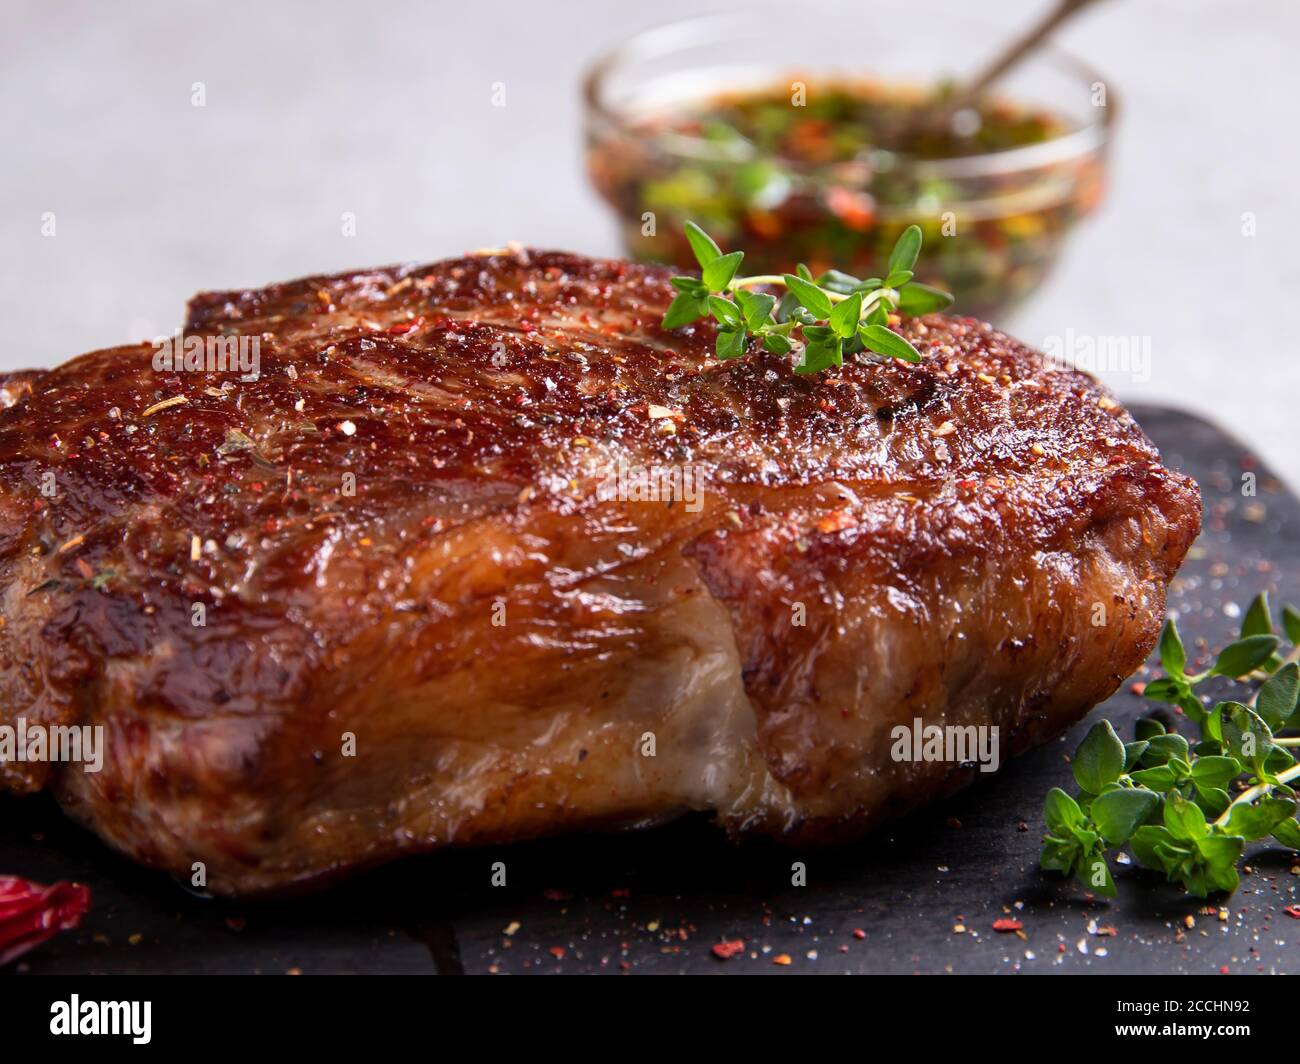 Juicy roasted beef steak with spices and thyme, close up Stock Photo